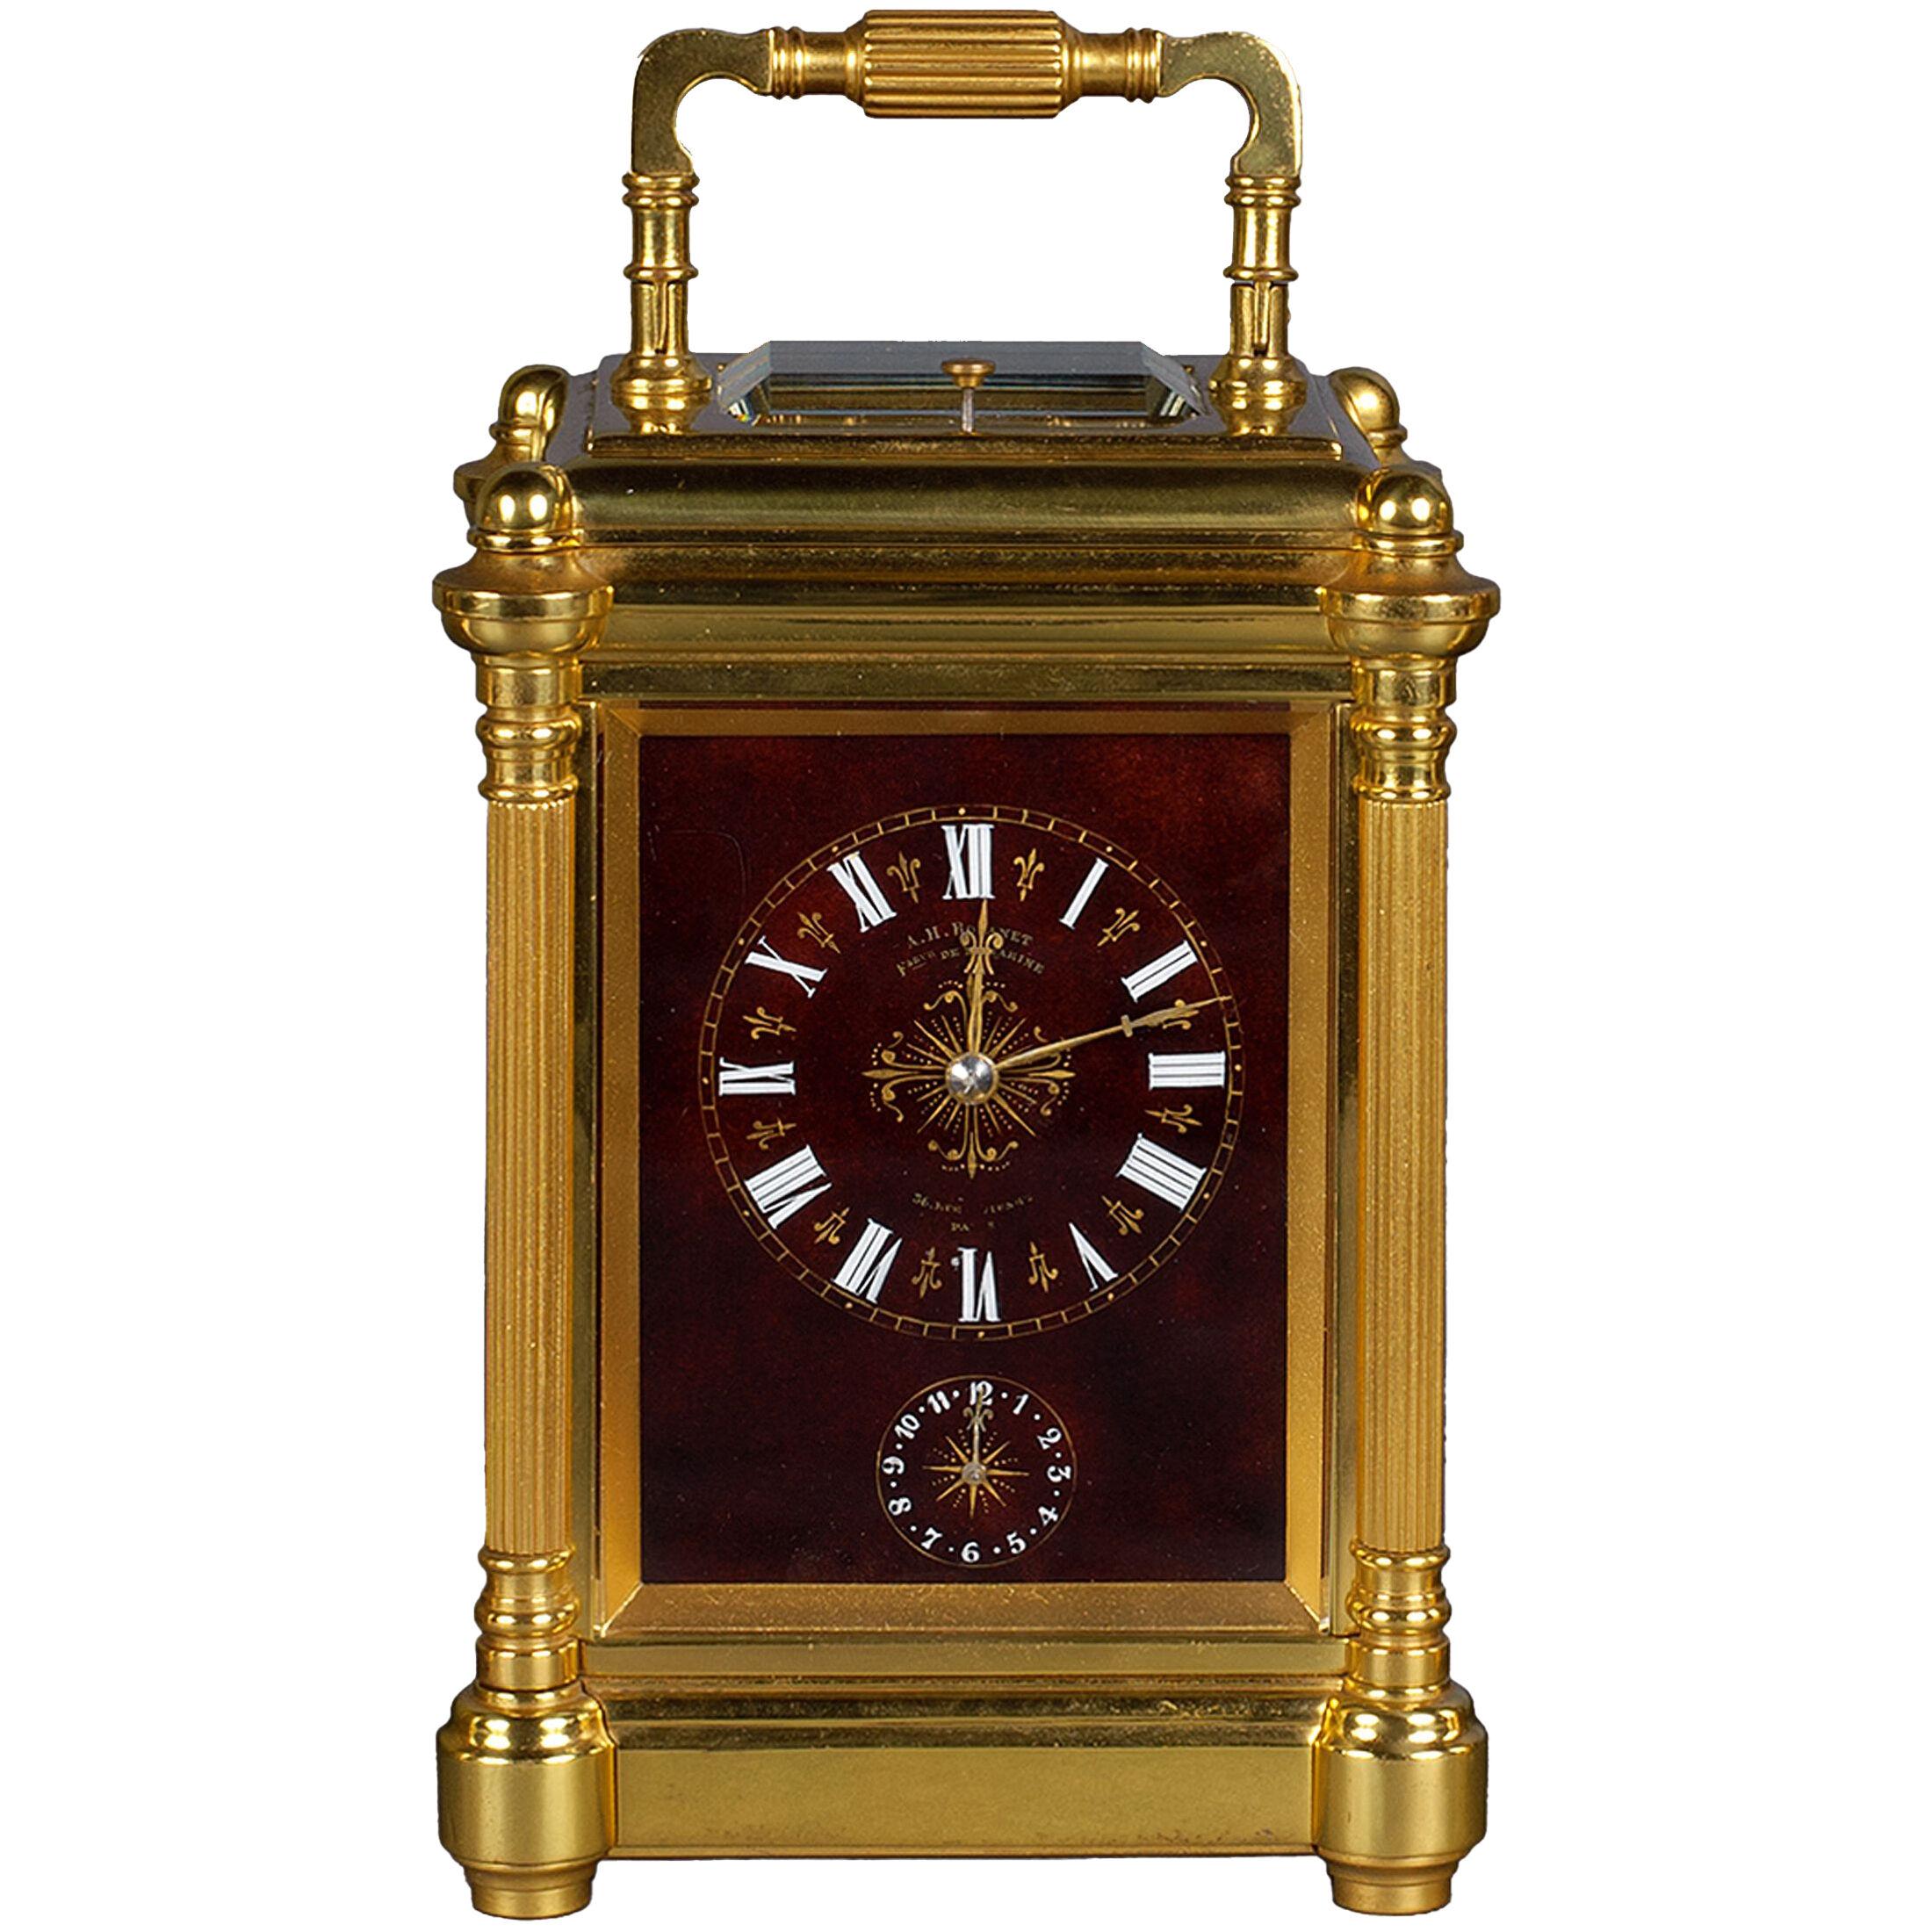 A.H.RODANET N° 2599. A good French repeating carriage alarm clock.